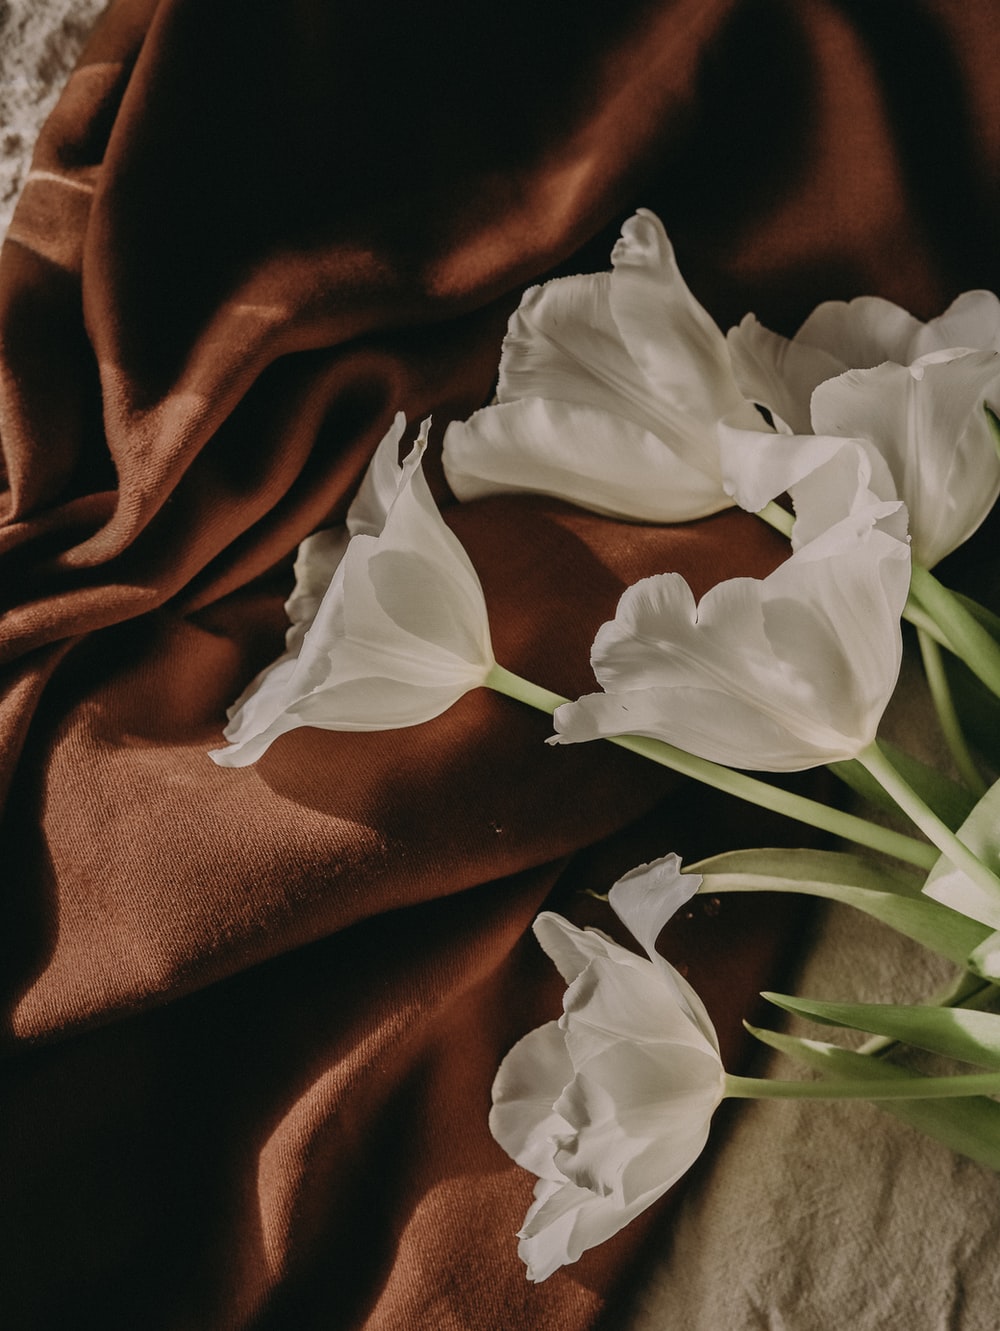 aesthetic looking white flowers on a brown cloth